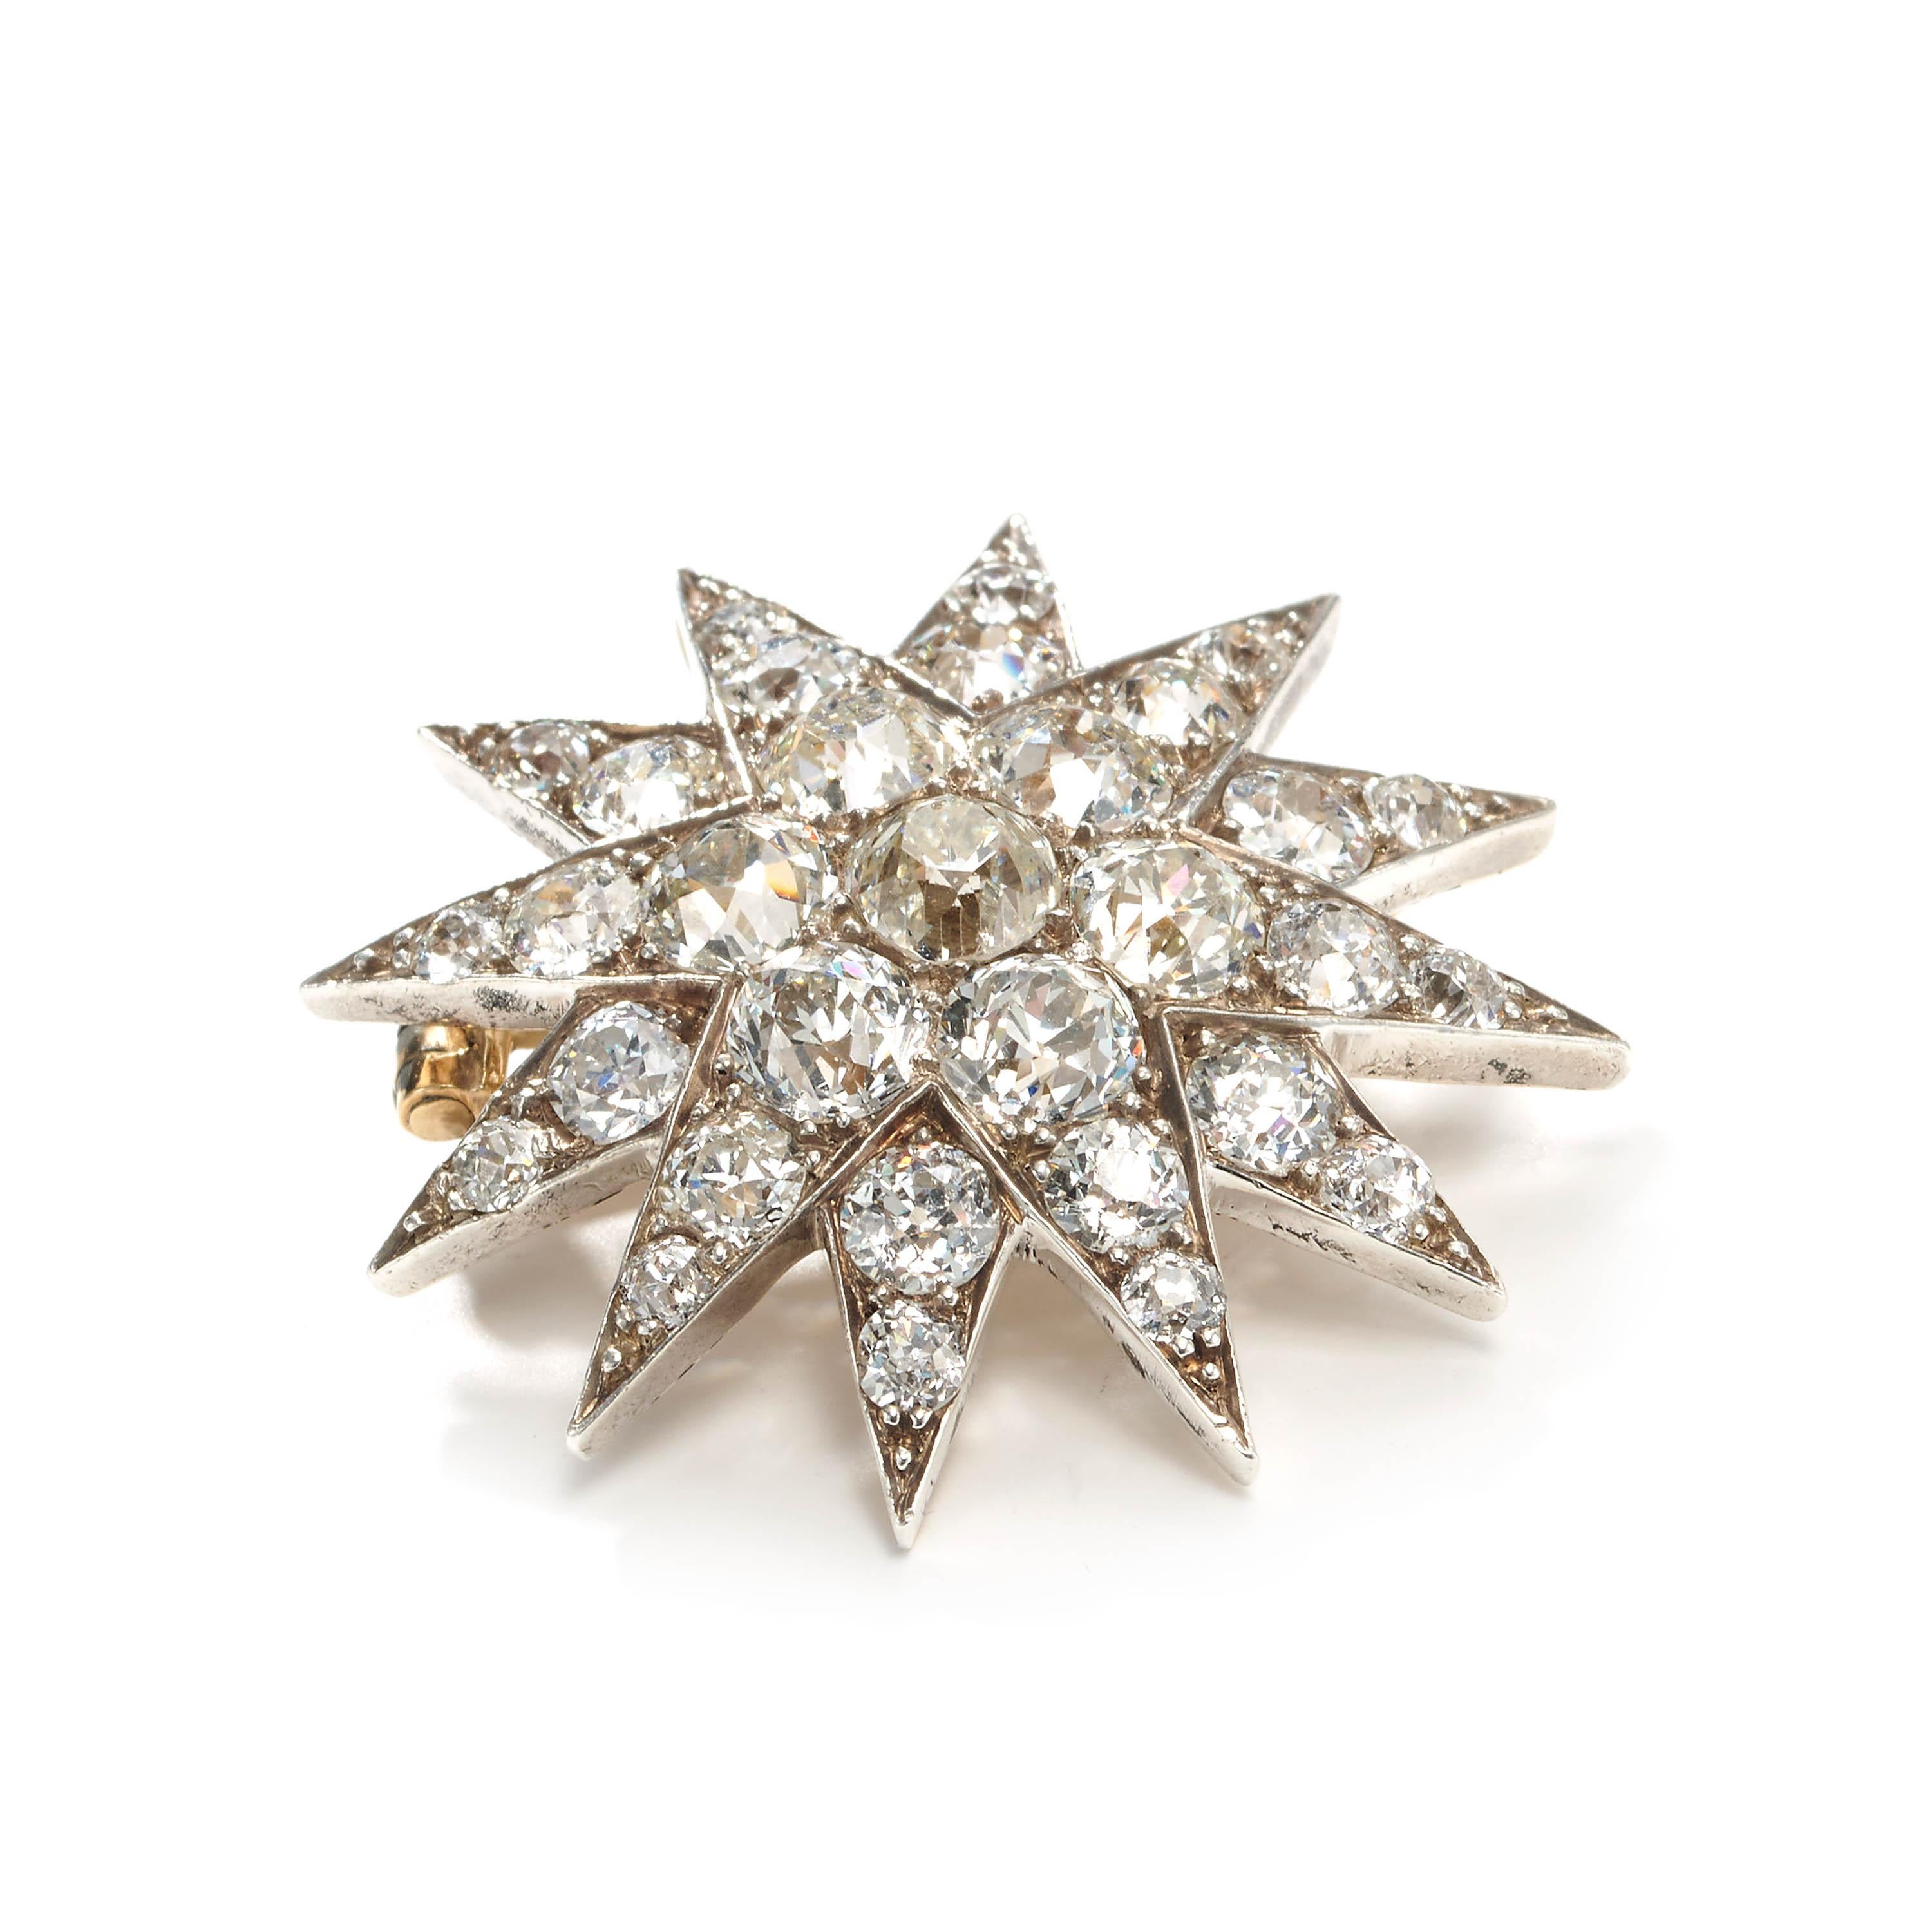 A Victorian diamond star brooch, with twelve points, set with European-cut diamonds, with an estimated total weight of 7.00ct, with an old-cut diamond, in the centre, weighing approximately 0.83ct, in grain settings, with a surrounding cluster of